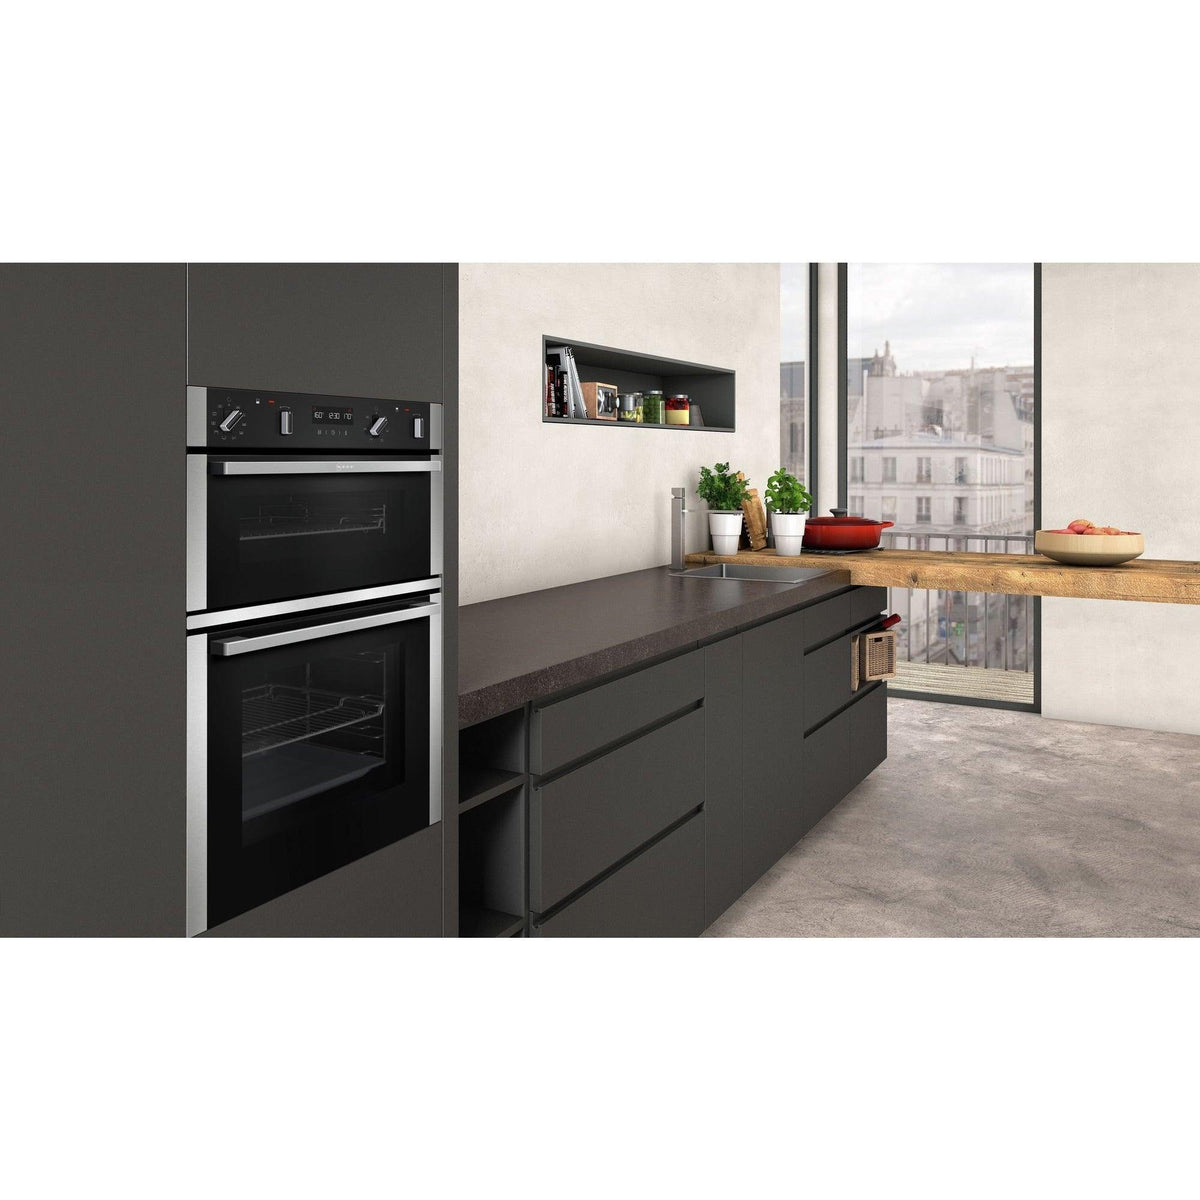 Neff N50 Built-In Electric Double Oven - Black &amp; Stainless Steel | U2ACM7HN0B from DID Electrical - guaranteed Irish, guaranteed quality service. (6890785013948)